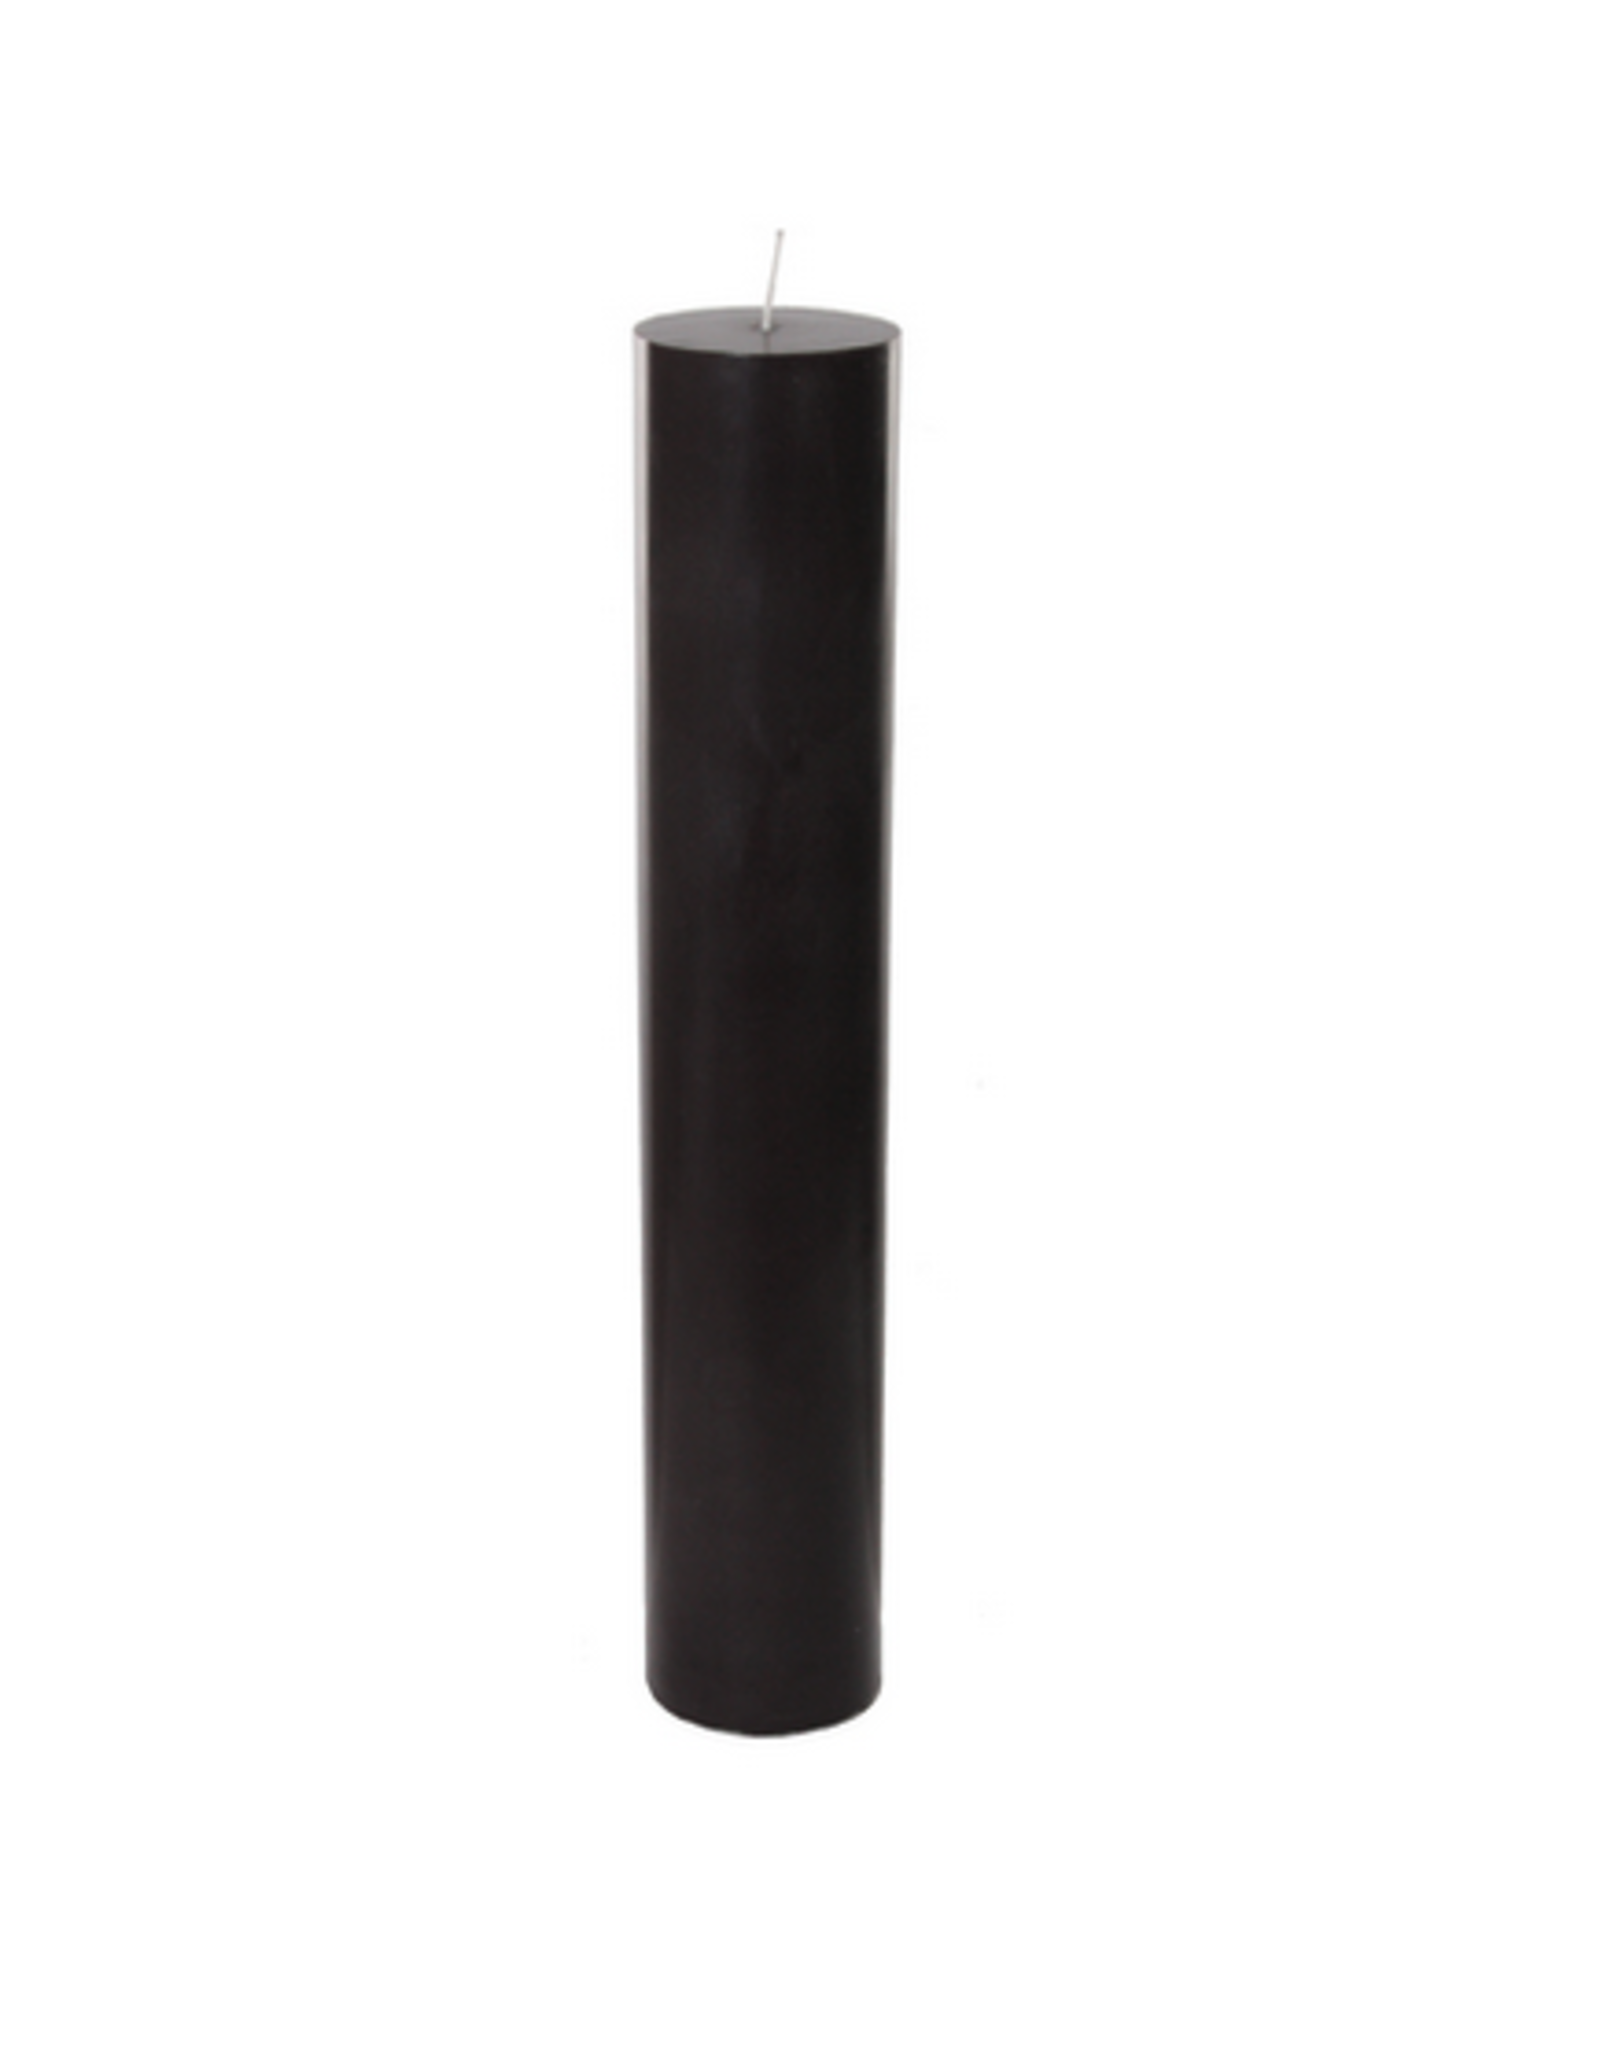 Black Stearin Cylinder Candle H15.75"